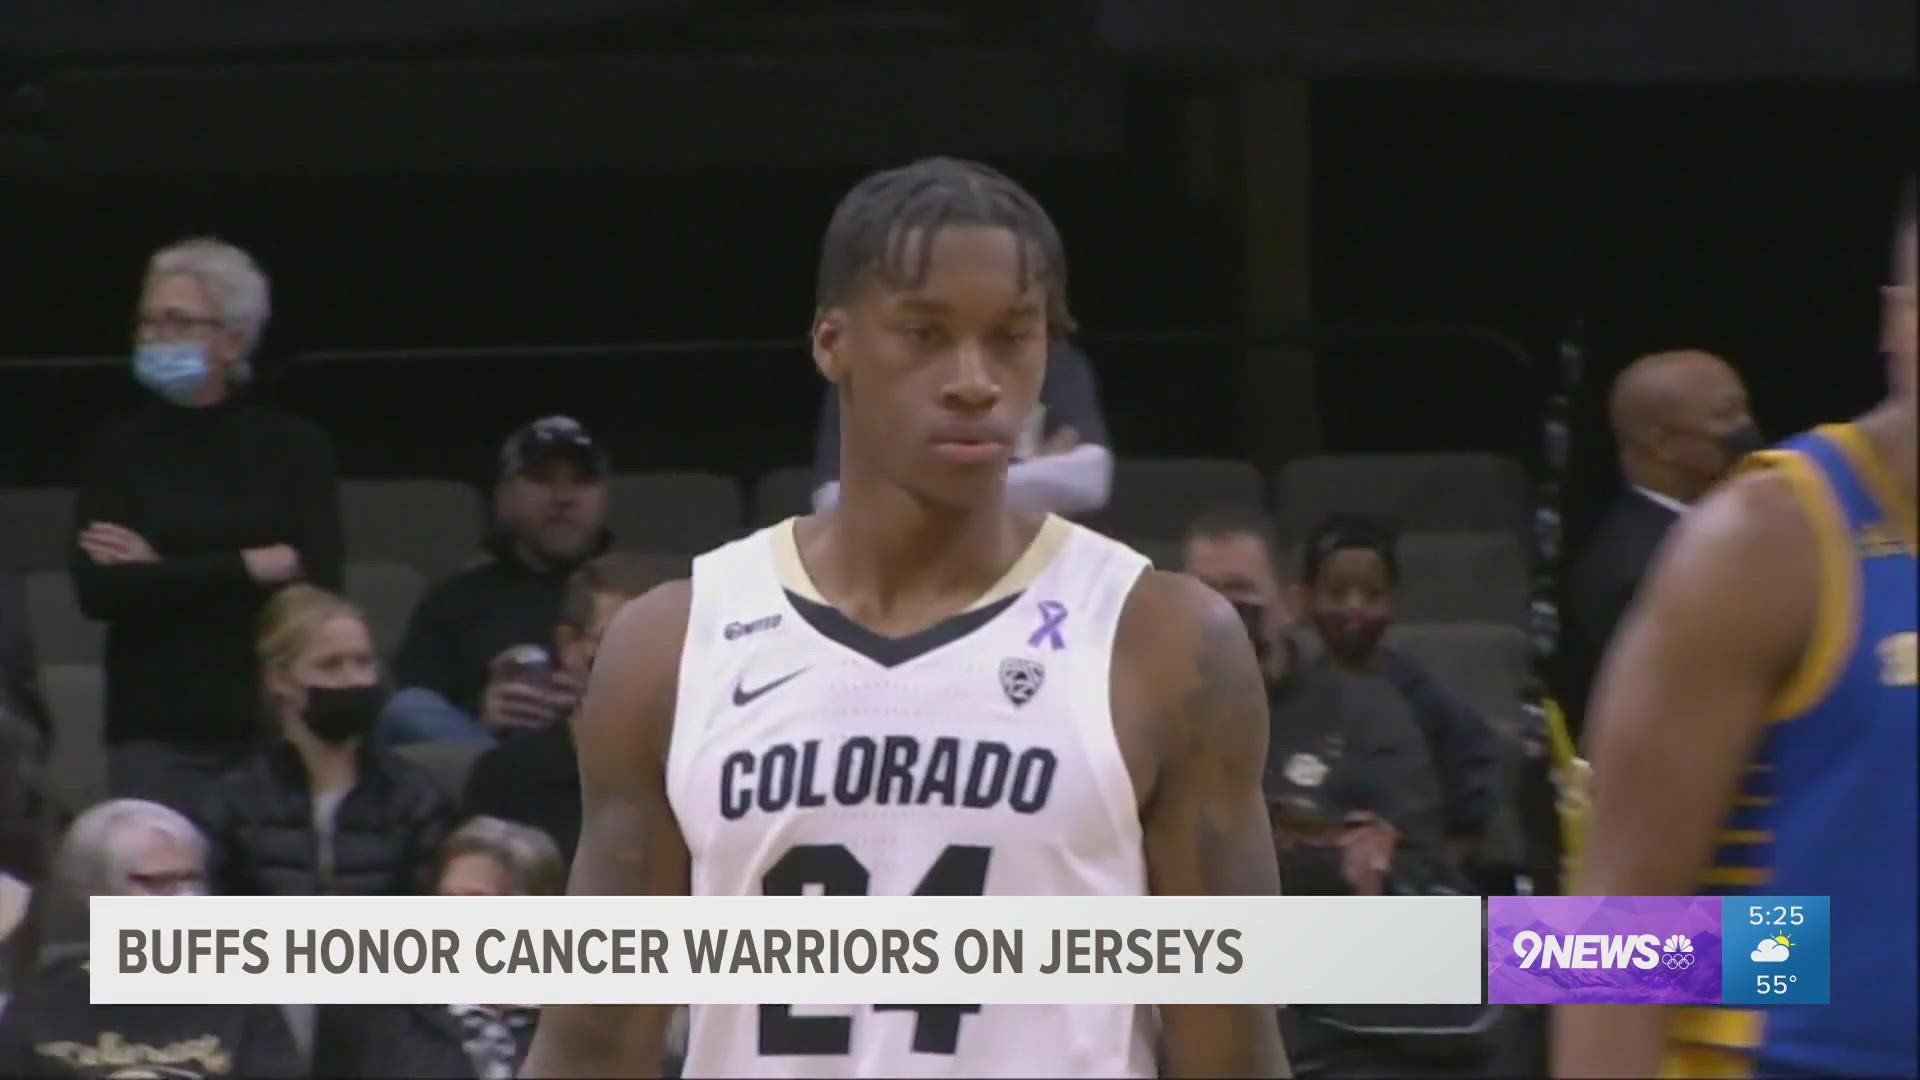 Colorado players wore the names of cancer patients on the backs of their jerseys with those very same people in attendance at the game.